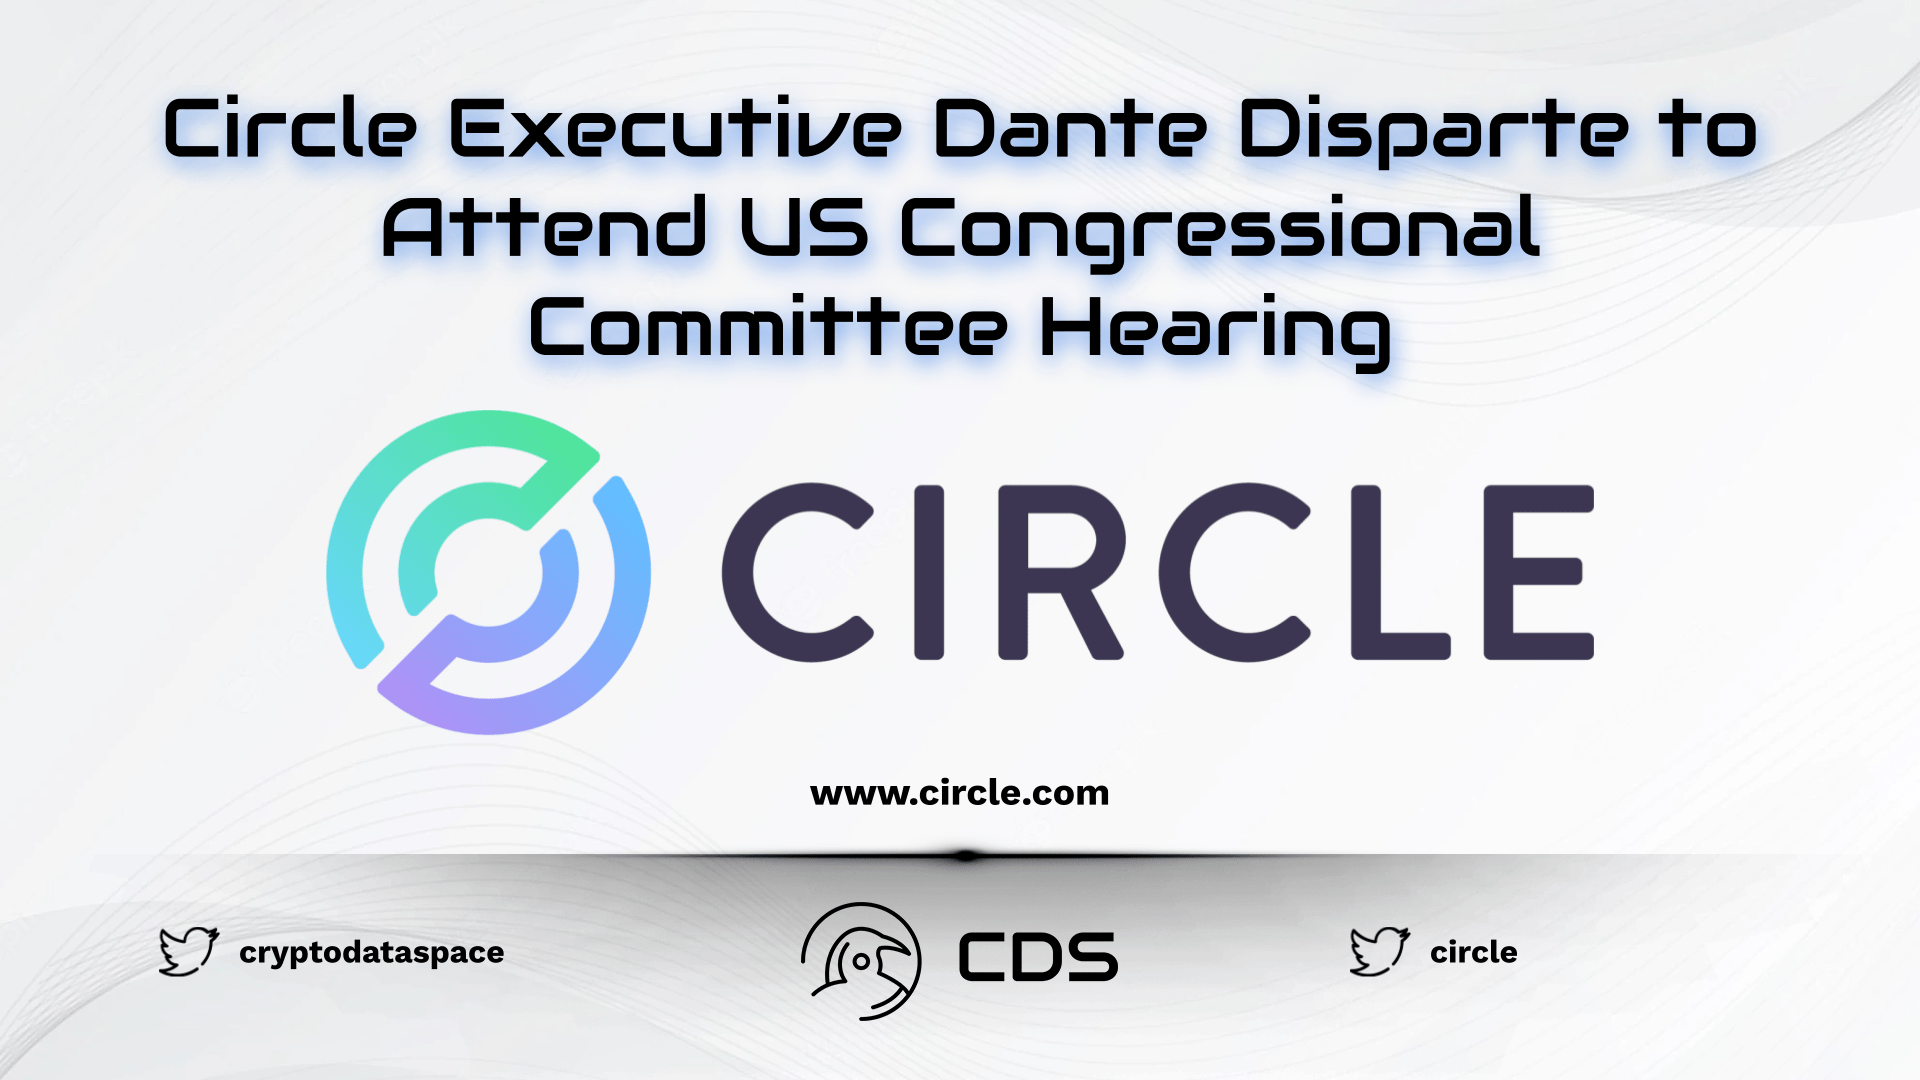 Circle Executive Dante Disparte to Attend US Congressional Committee Hearing